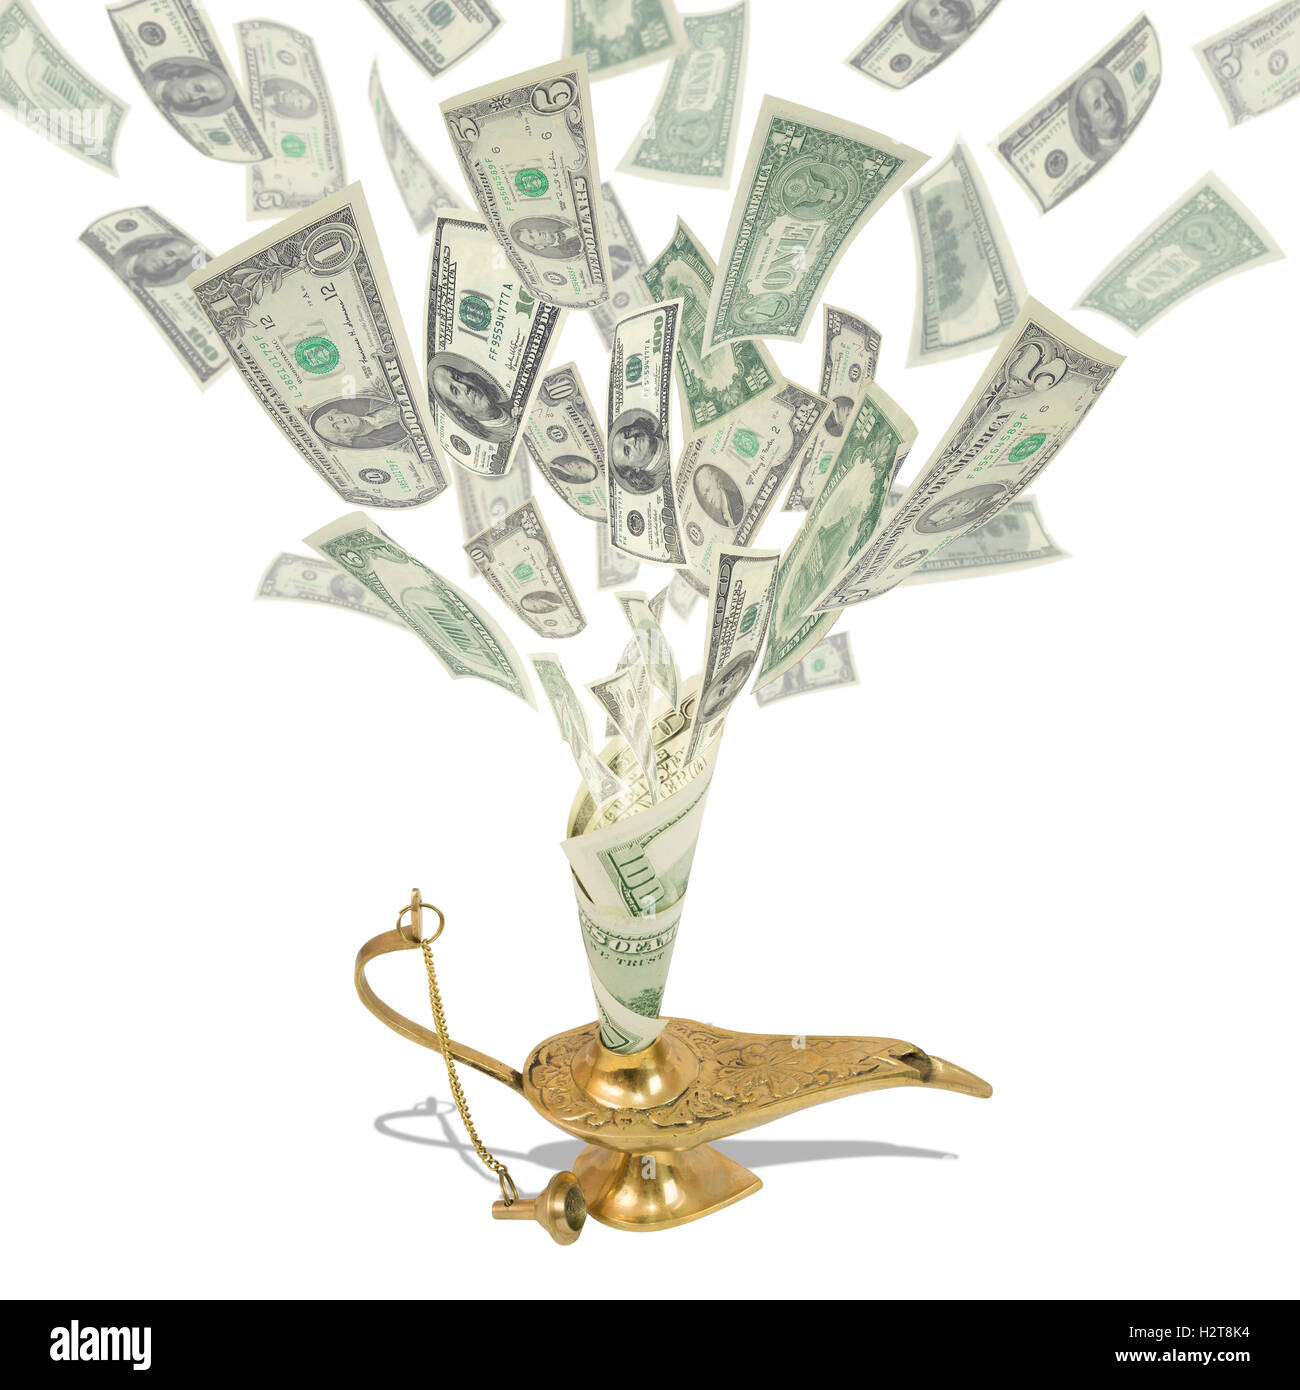 Money fly out of Aladdin's magic lamp Stock Photo - Alamy